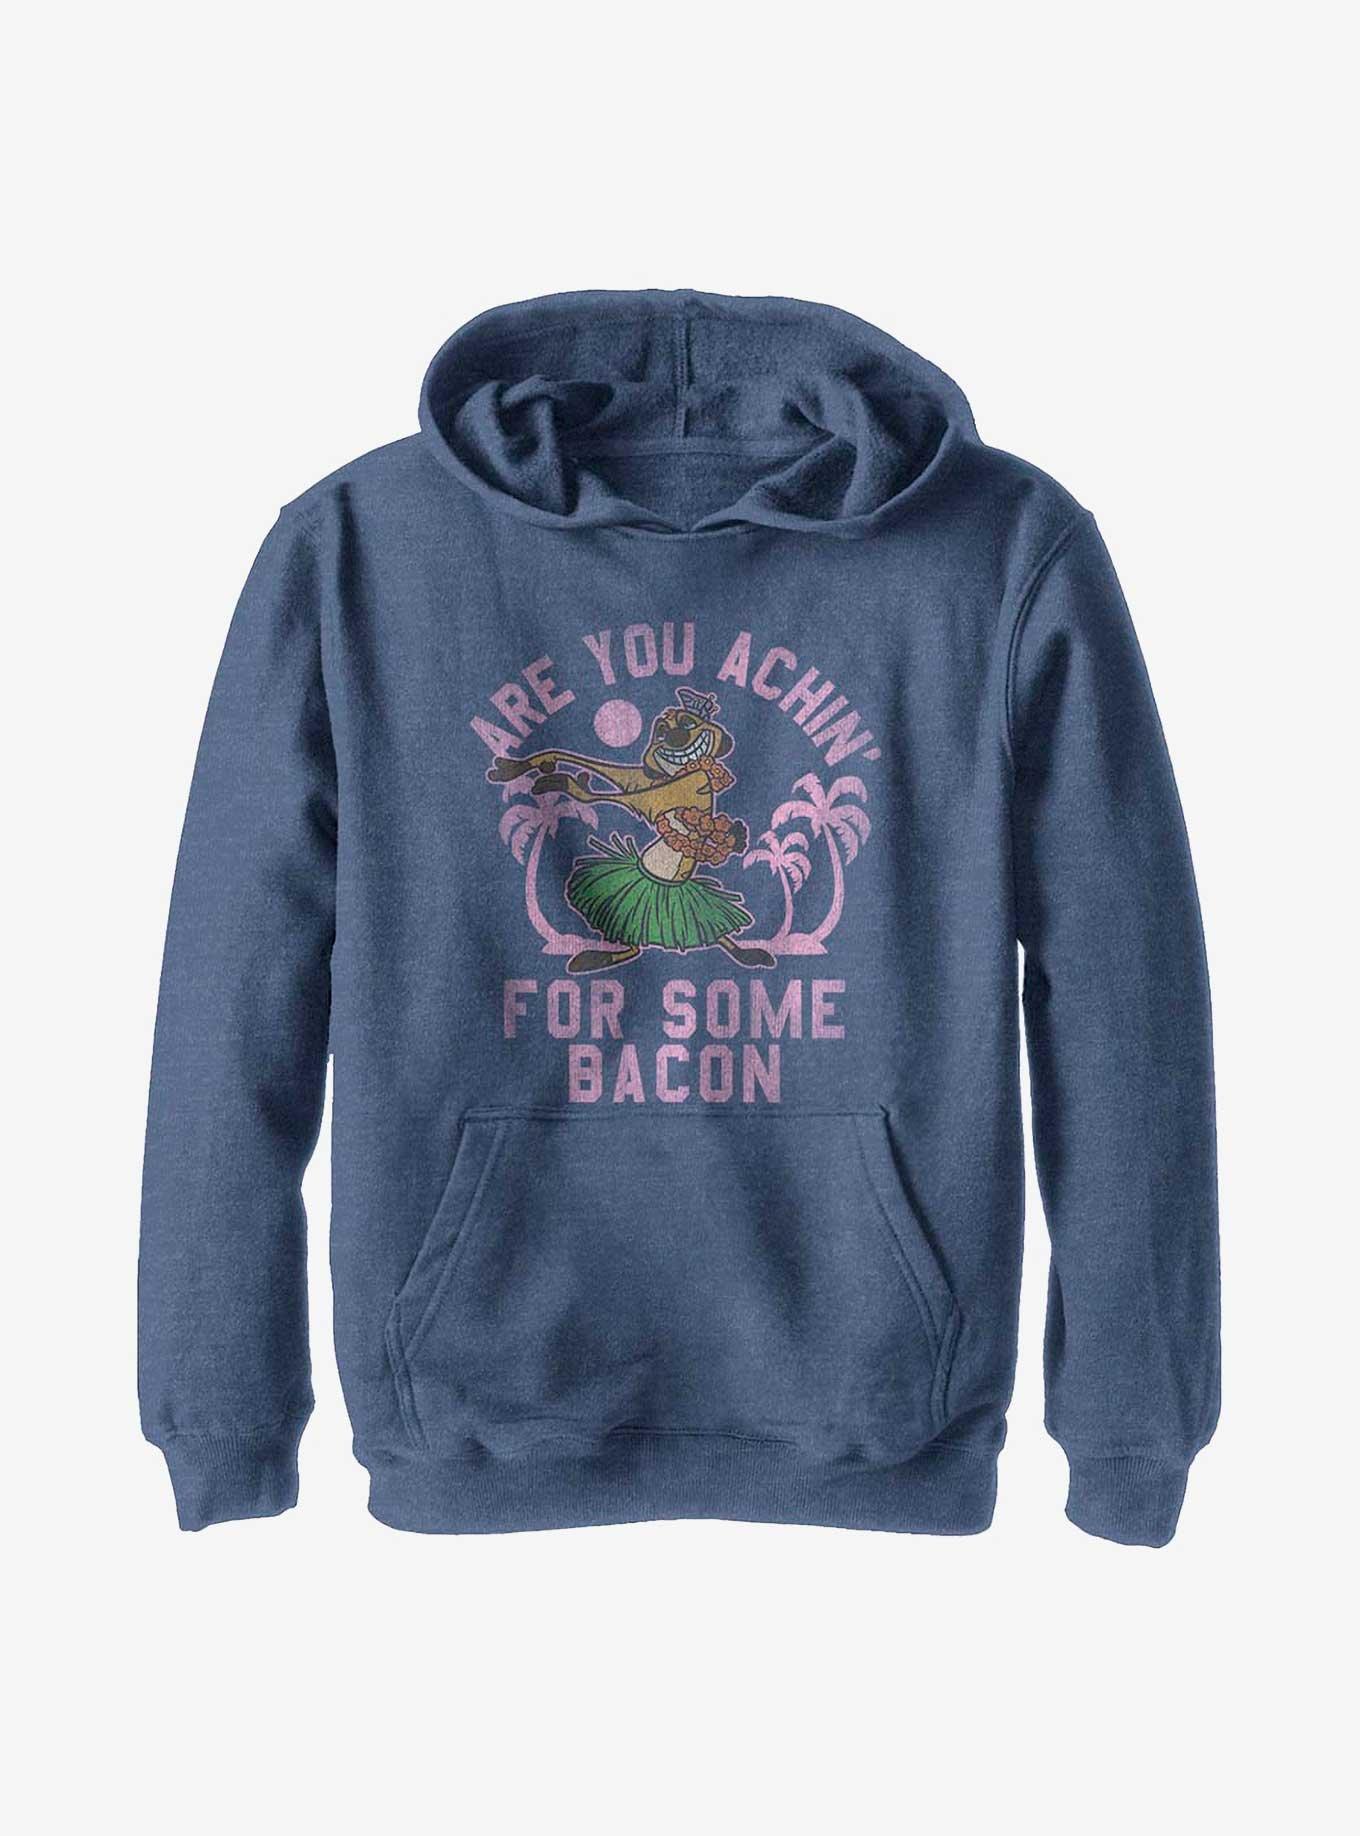 Disney The Lion King Bacon Achin Youth Hoodie, NAVY HTR, hi-res